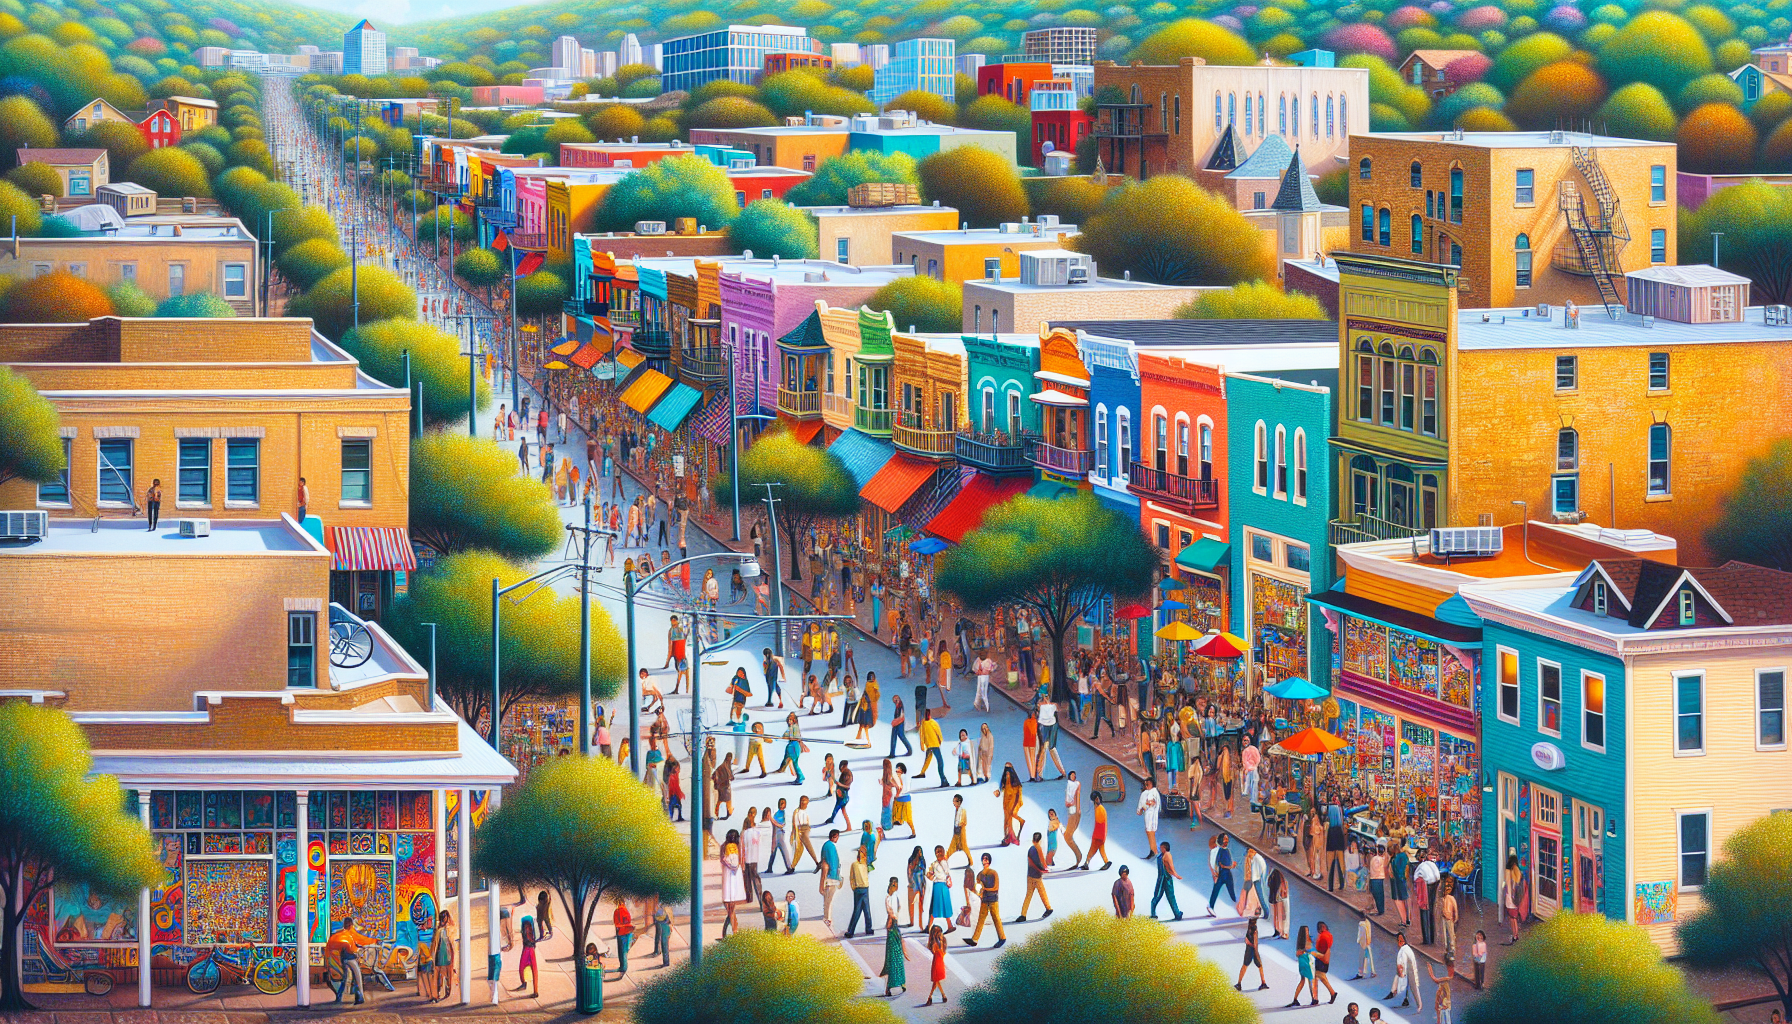 Artistic depiction of trendy East Austin neighborhood with vibrant community and green spaces